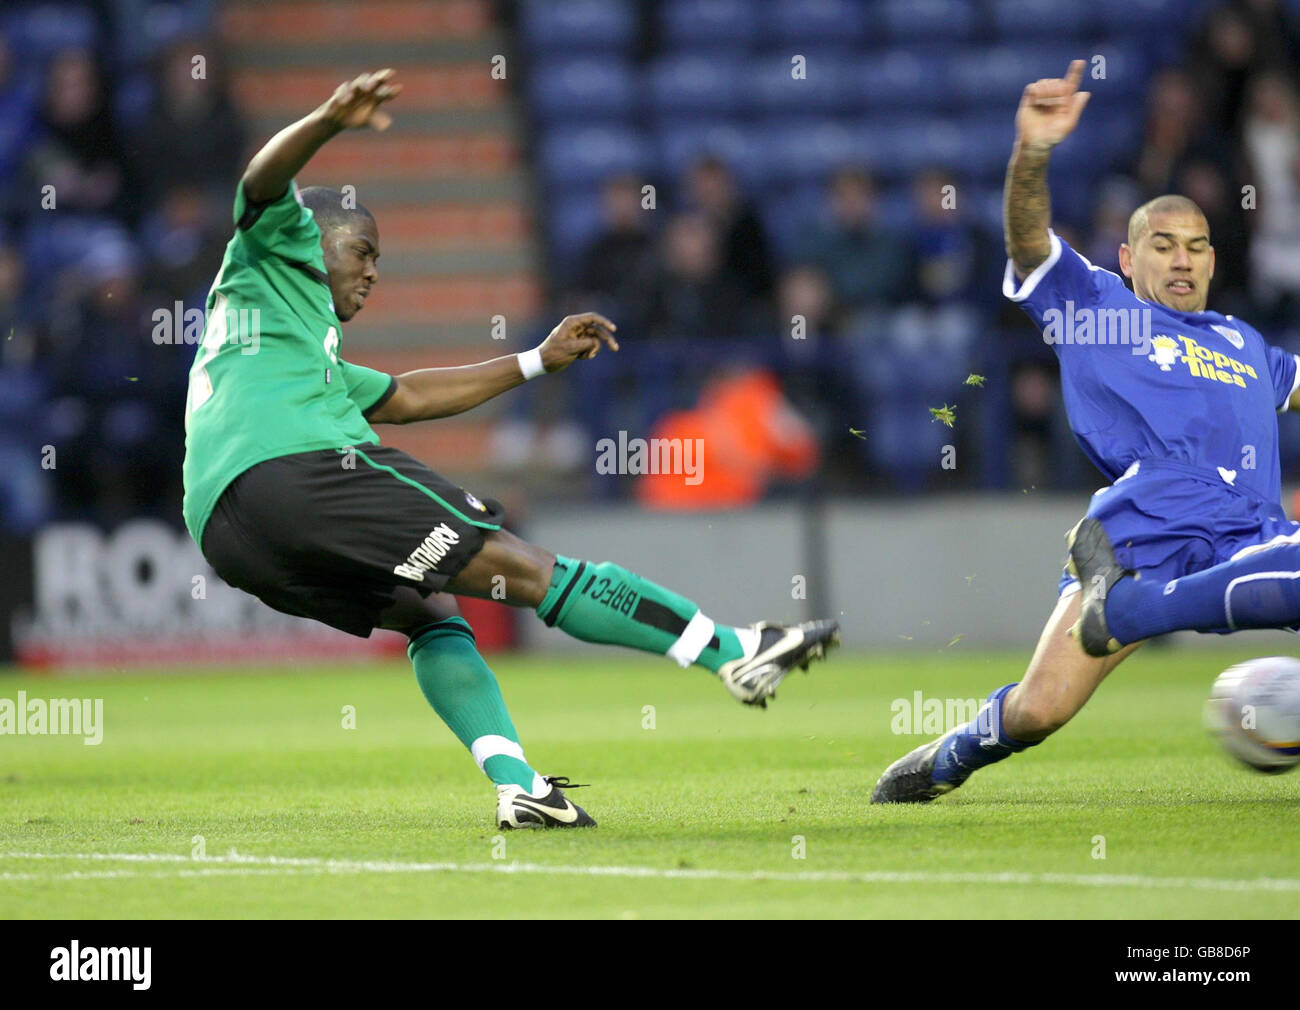 Joe Kuffour shoots at goal for Bristol Rovers ahead of Patrick Kisnorbo during the Coca-Cola League One match at the Walkers Stadium, Leicester. Stock Photo